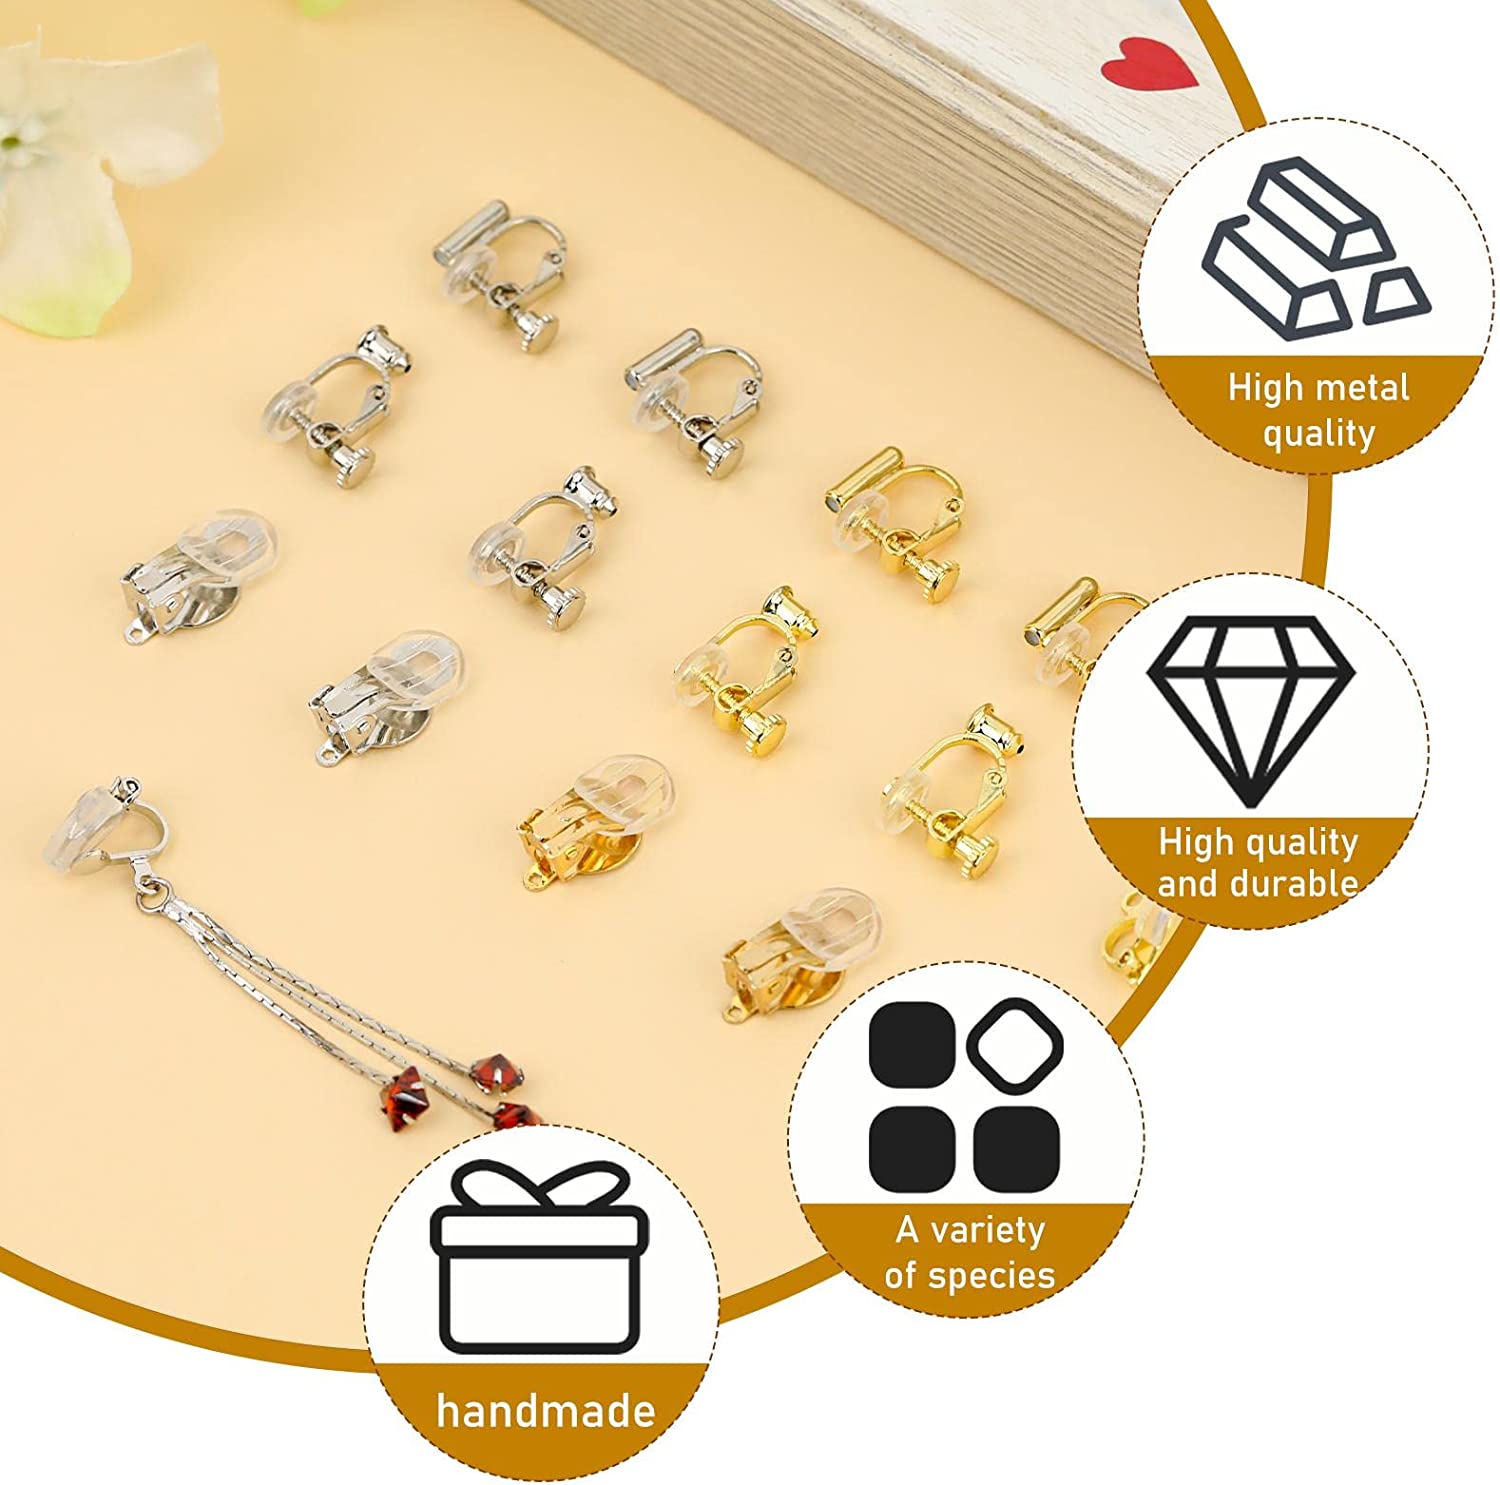 16 Pcs Clip on Earring Converter with Silicon Earring Pads, Gold Silver Round Flat Back Tray Earring Clip, and Converter Components with Post for DIY Earring Making for Women Men None Pierced Ears - image 3 of 5